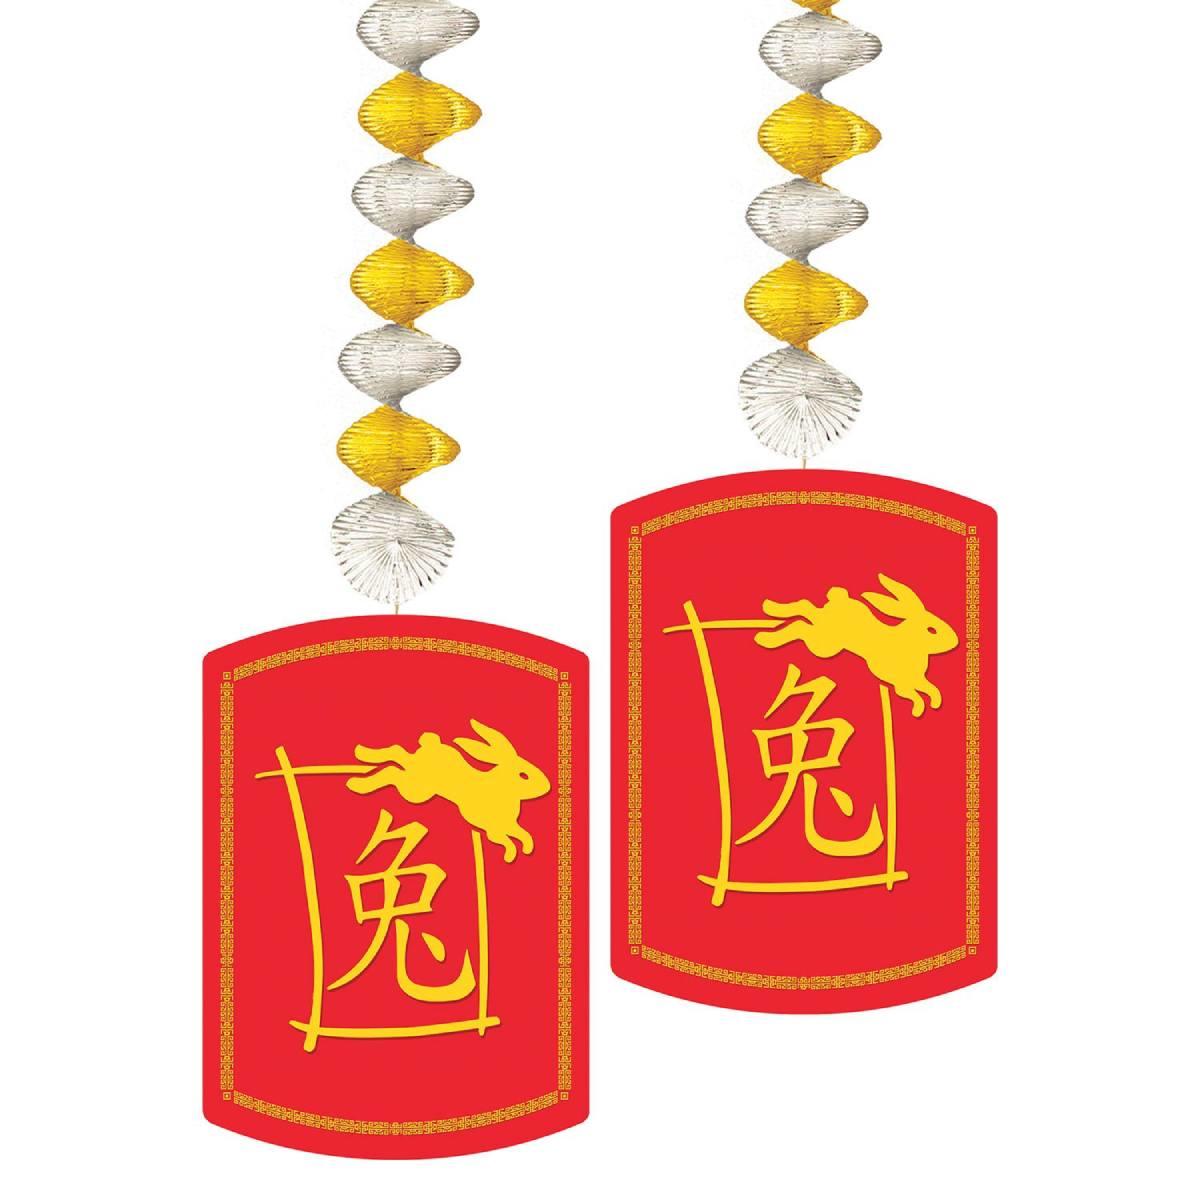 Deluxe 2023 Year of the Rabbit Dangler Decorations pk2 by Beistle 54864_RAB available here at Karnival Costumes online party shop